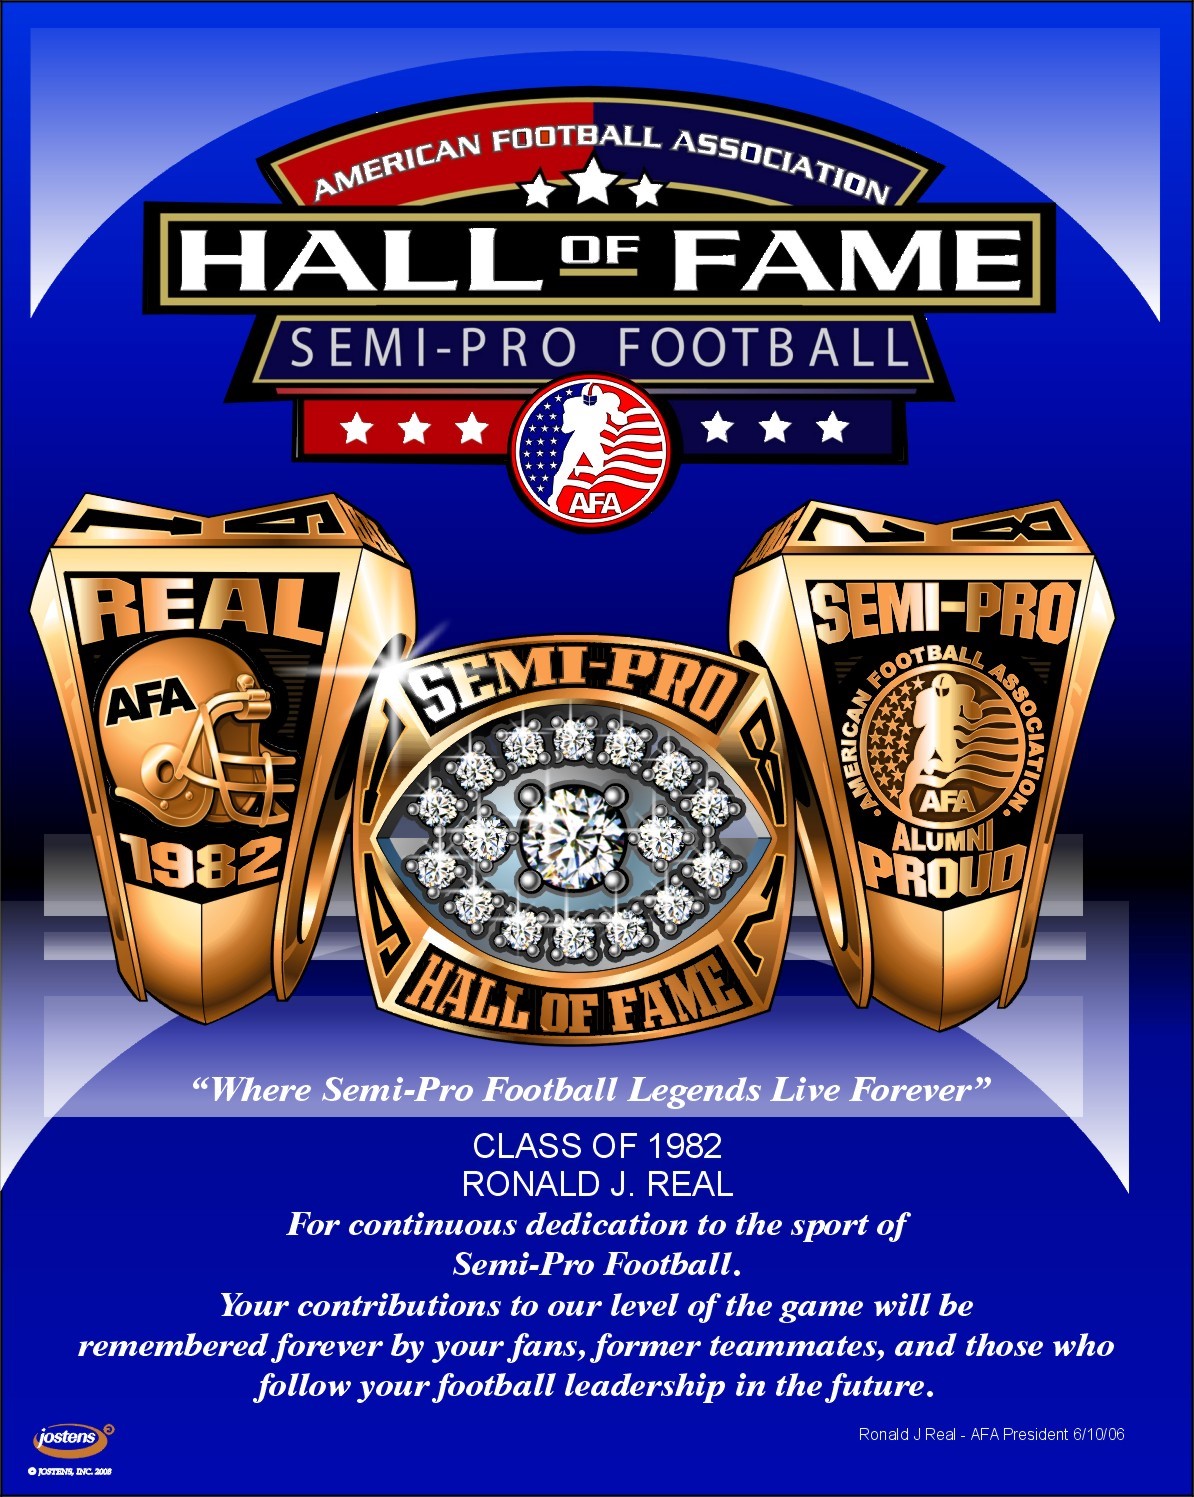 37th Annual American Football Association Hall of Fame Induction